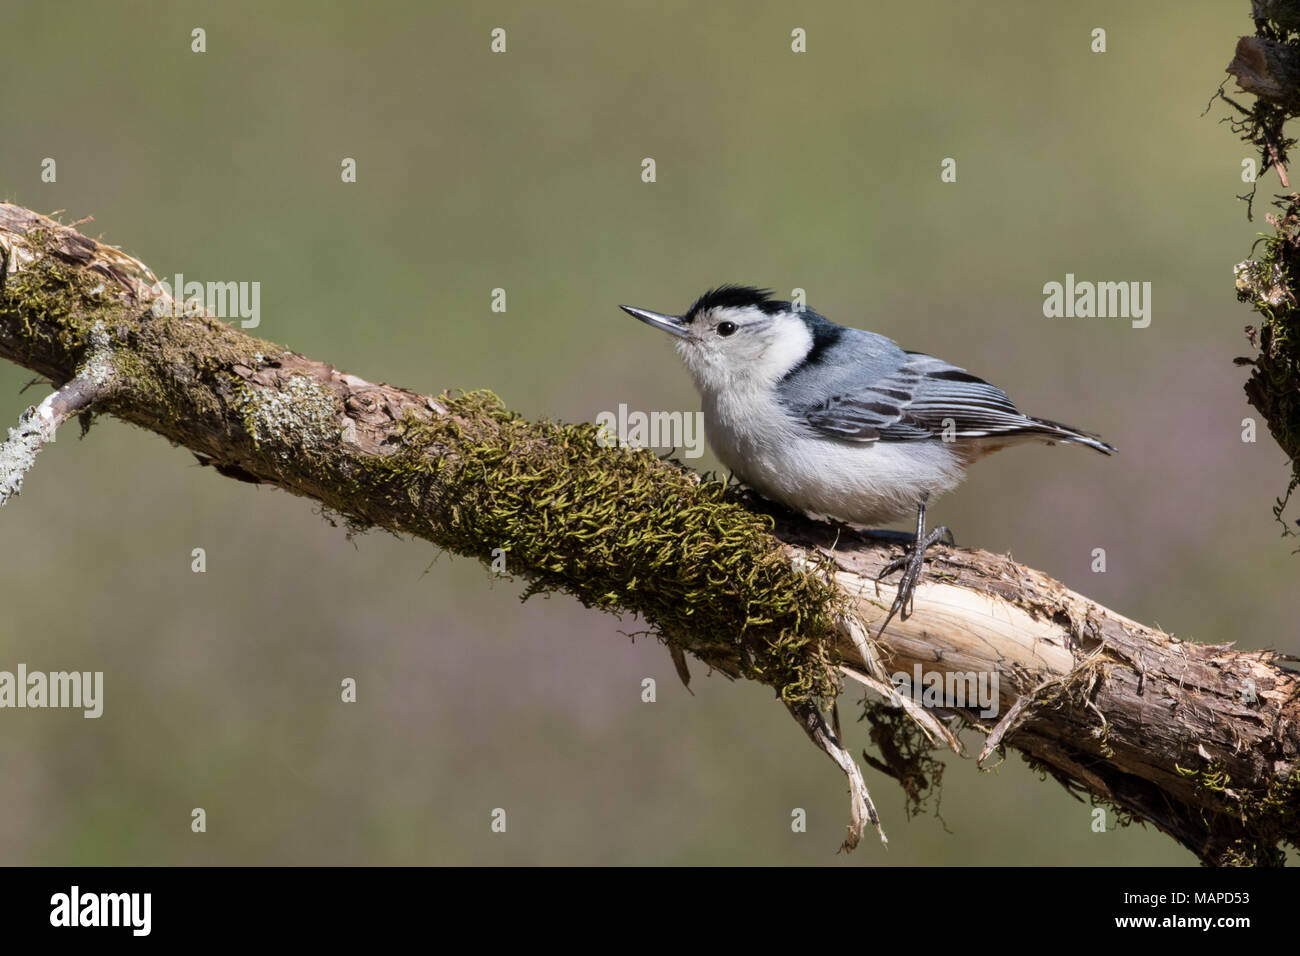 A portrait of a white-breasted nuthatch. Stock Photo